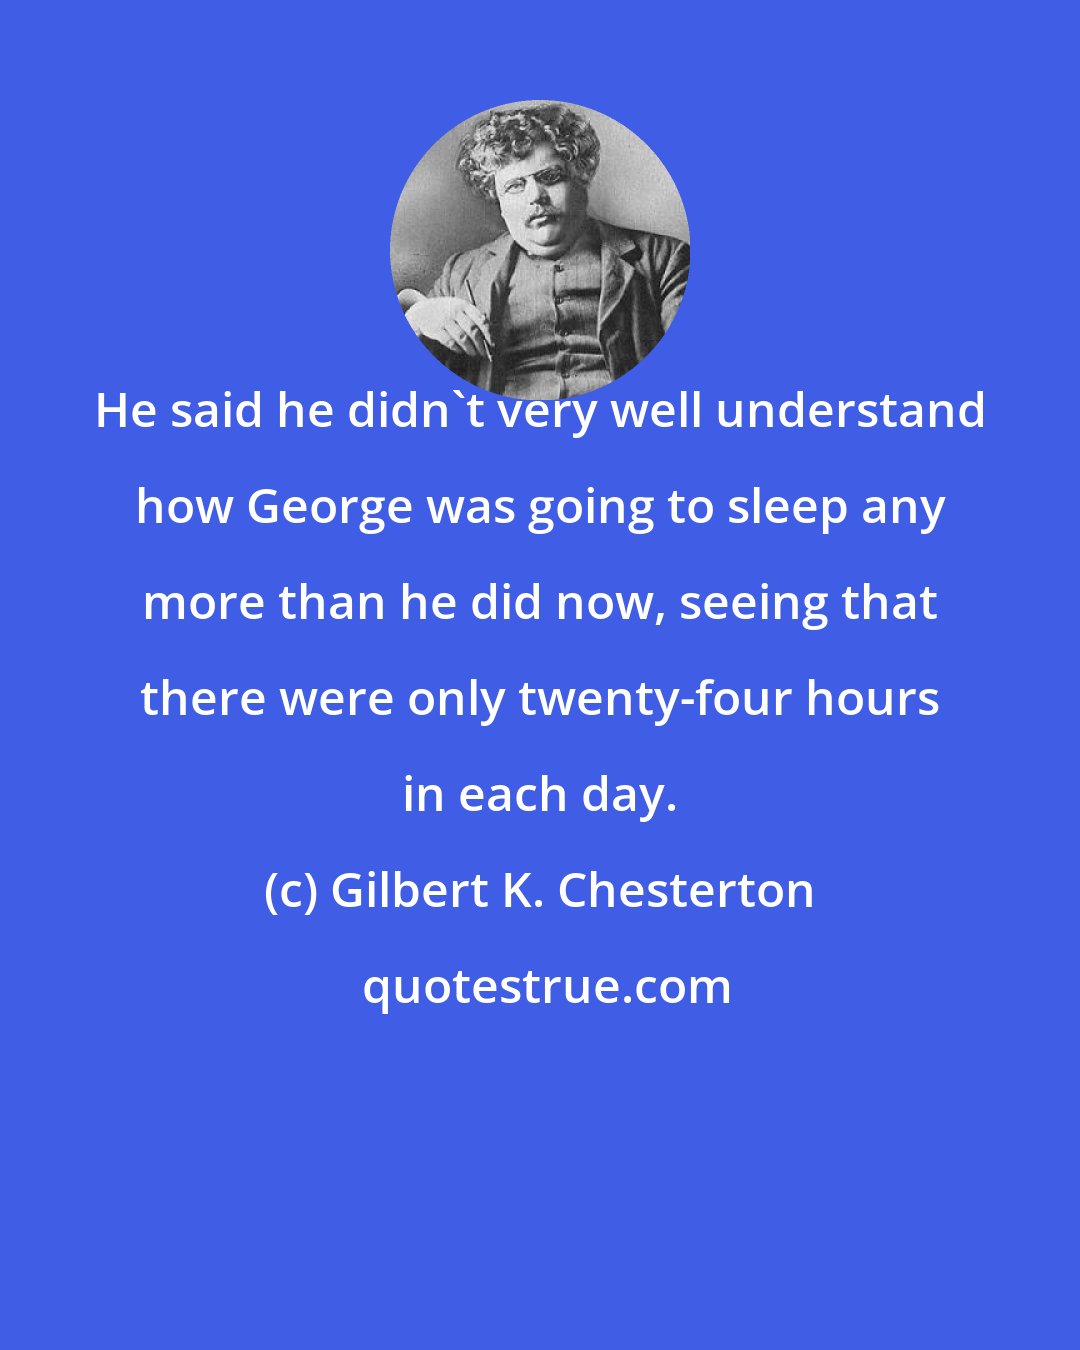 Gilbert K. Chesterton: He said he didn't very well understand how George was going to sleep any more than he did now, seeing that there were only twenty-four hours in each day.